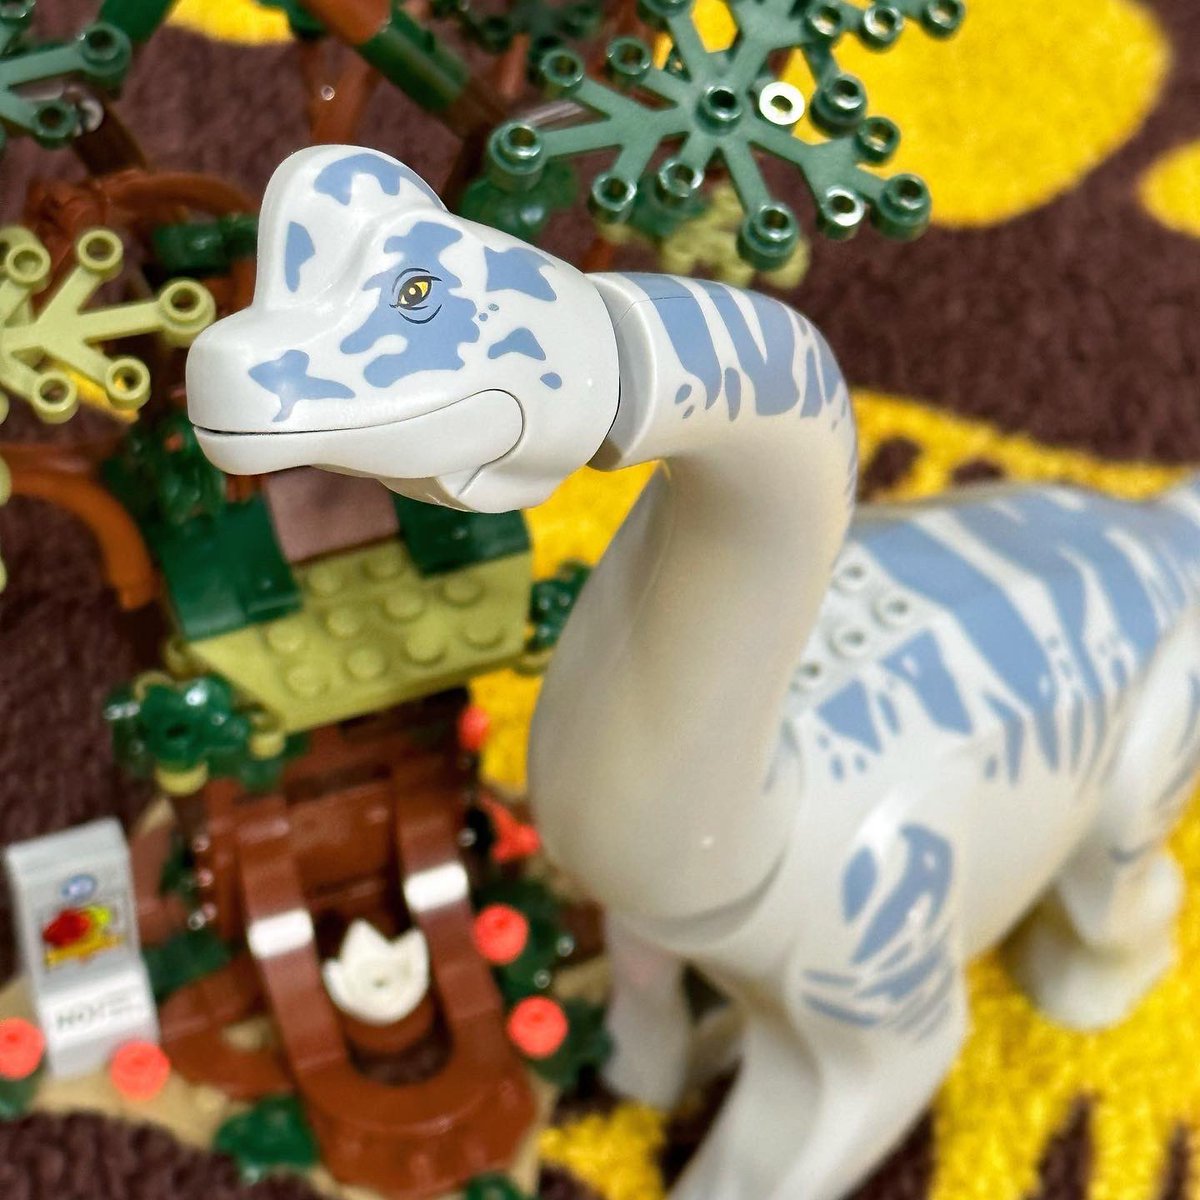 together to perfectly recreated *that* scene. Obsessed!

#collectjurassic #jurassicworld #jurassicpark #jp30 #jurassicpark30 #jurassicpark30thanniversary #lego #legojurassicworld #legojurassicpark #jurassicworlddominion #toys #toynews #toycollector #campcretaceous